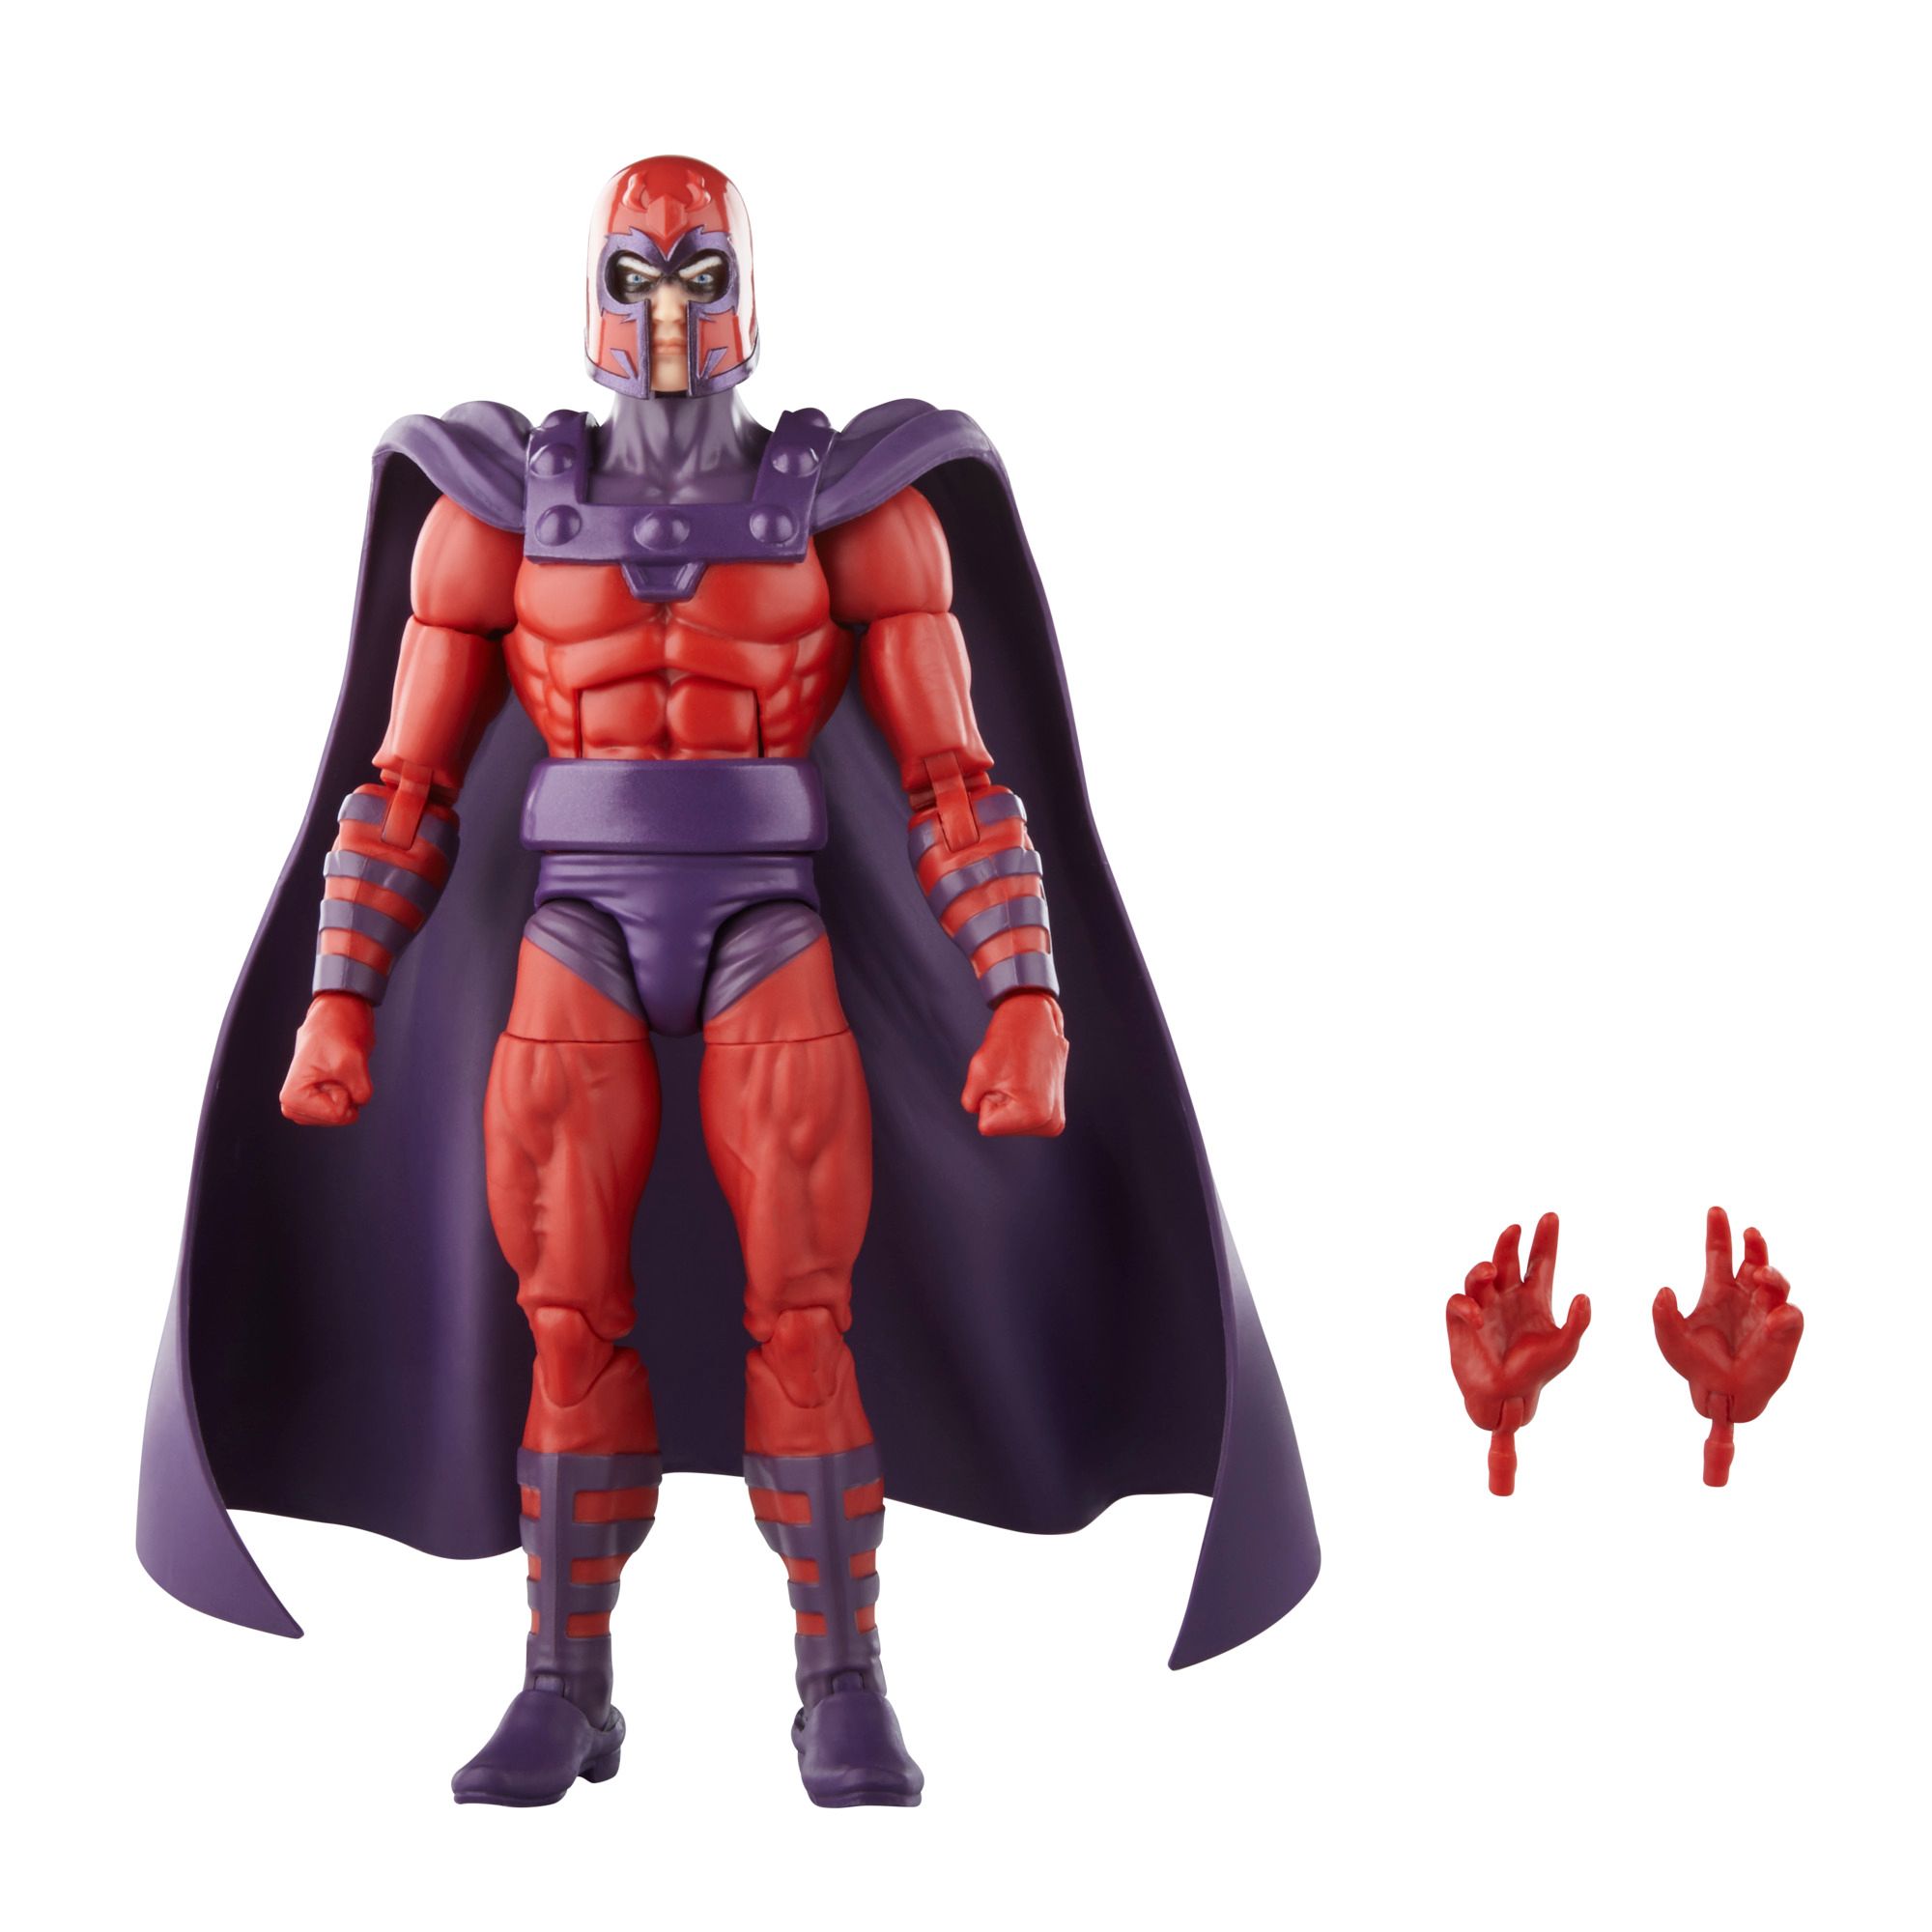 Marvel Legends Series Comic-Con reveals include Marvel Knights